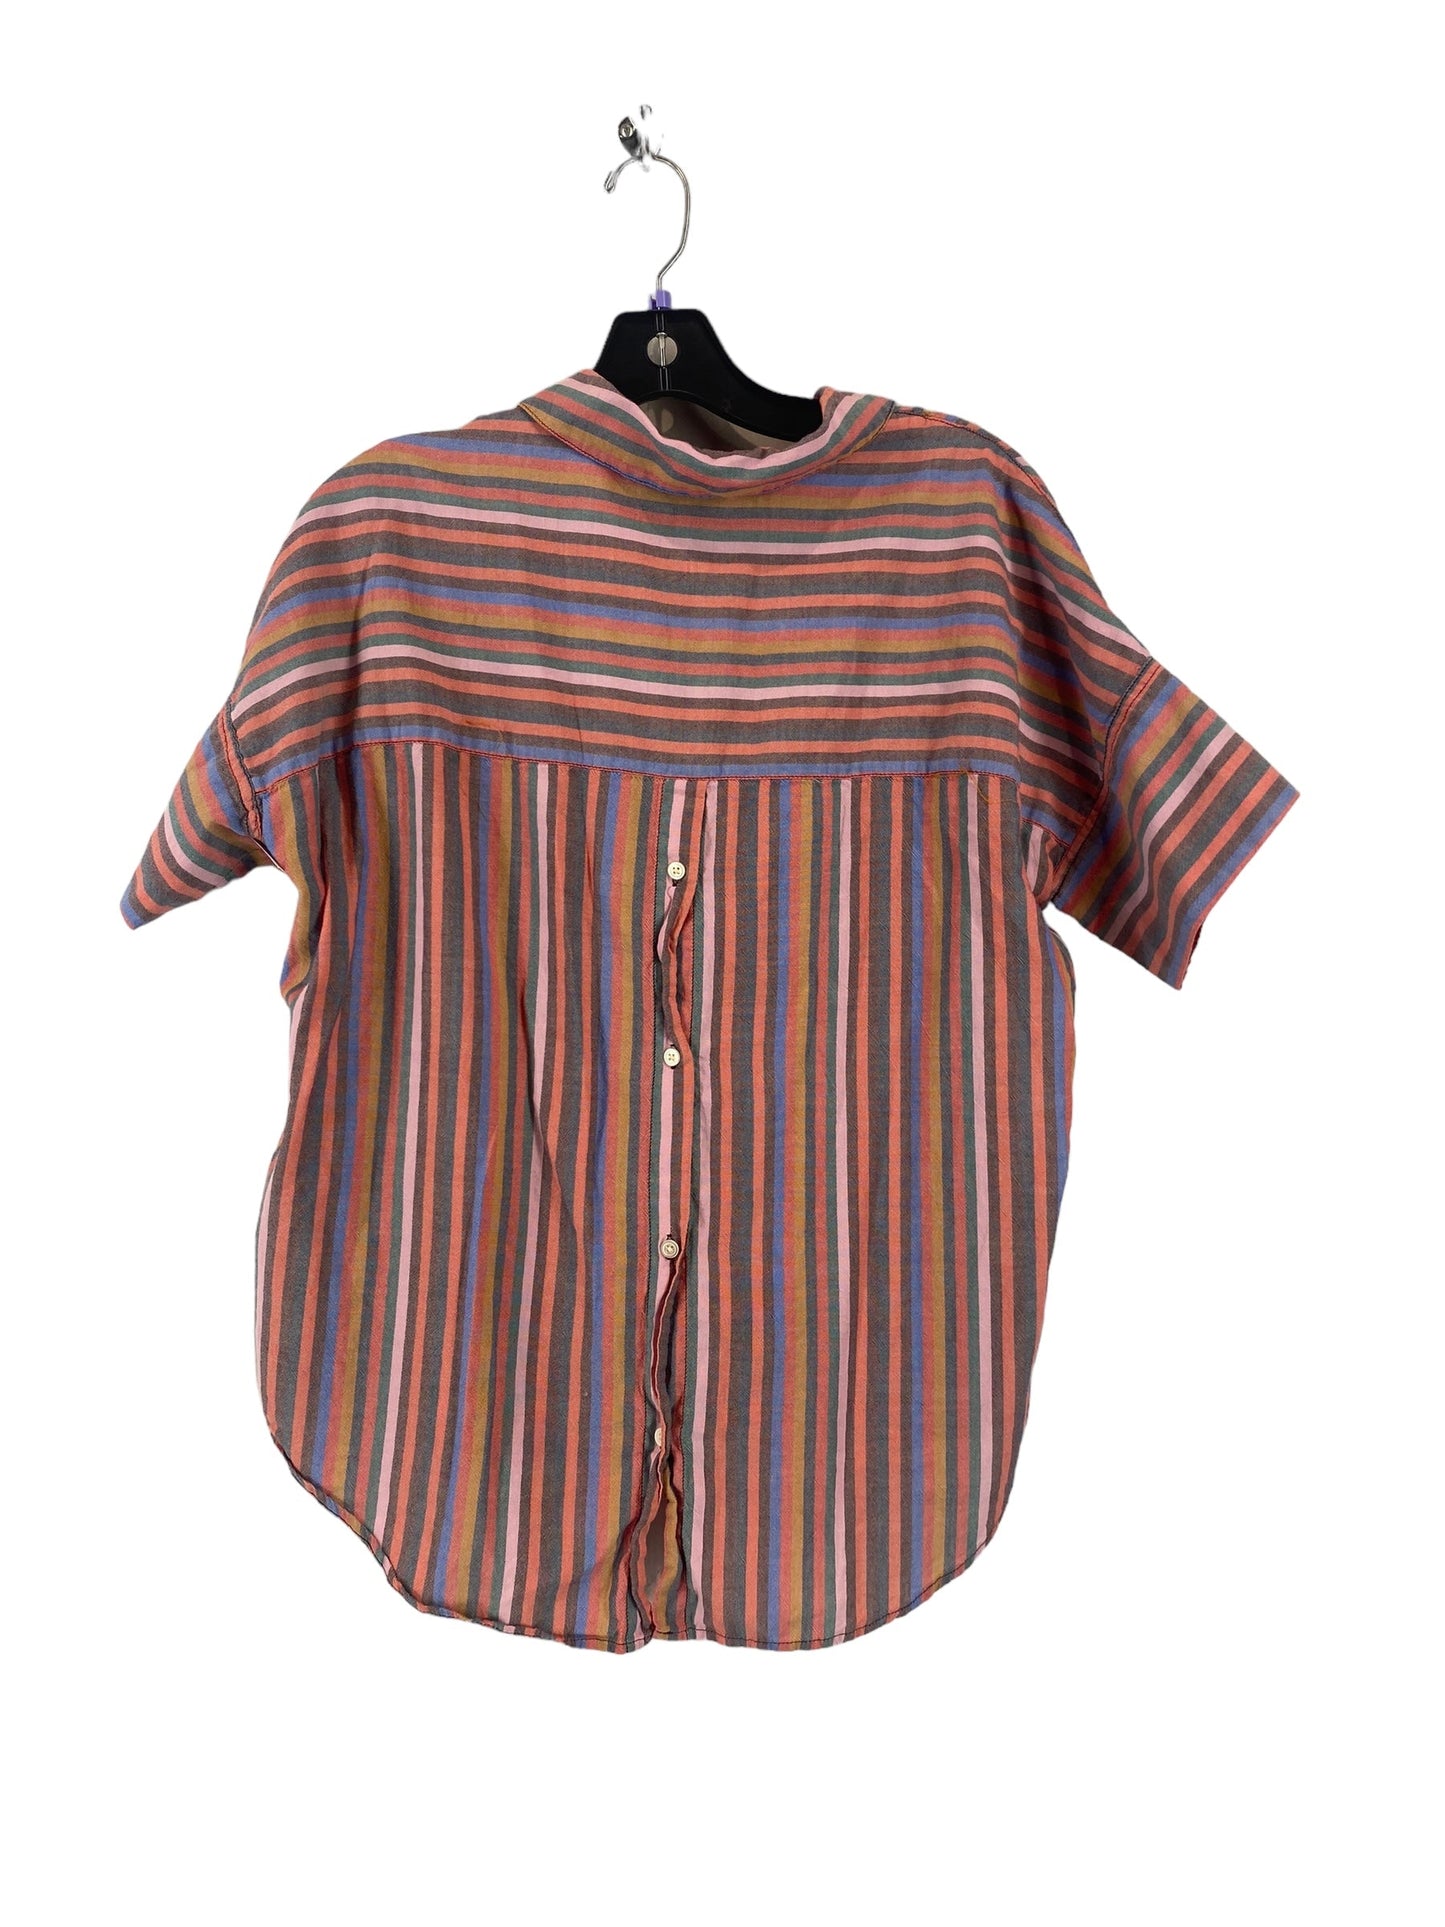 Striped Pattern Top Short Sleeve Madewell, Size Xs